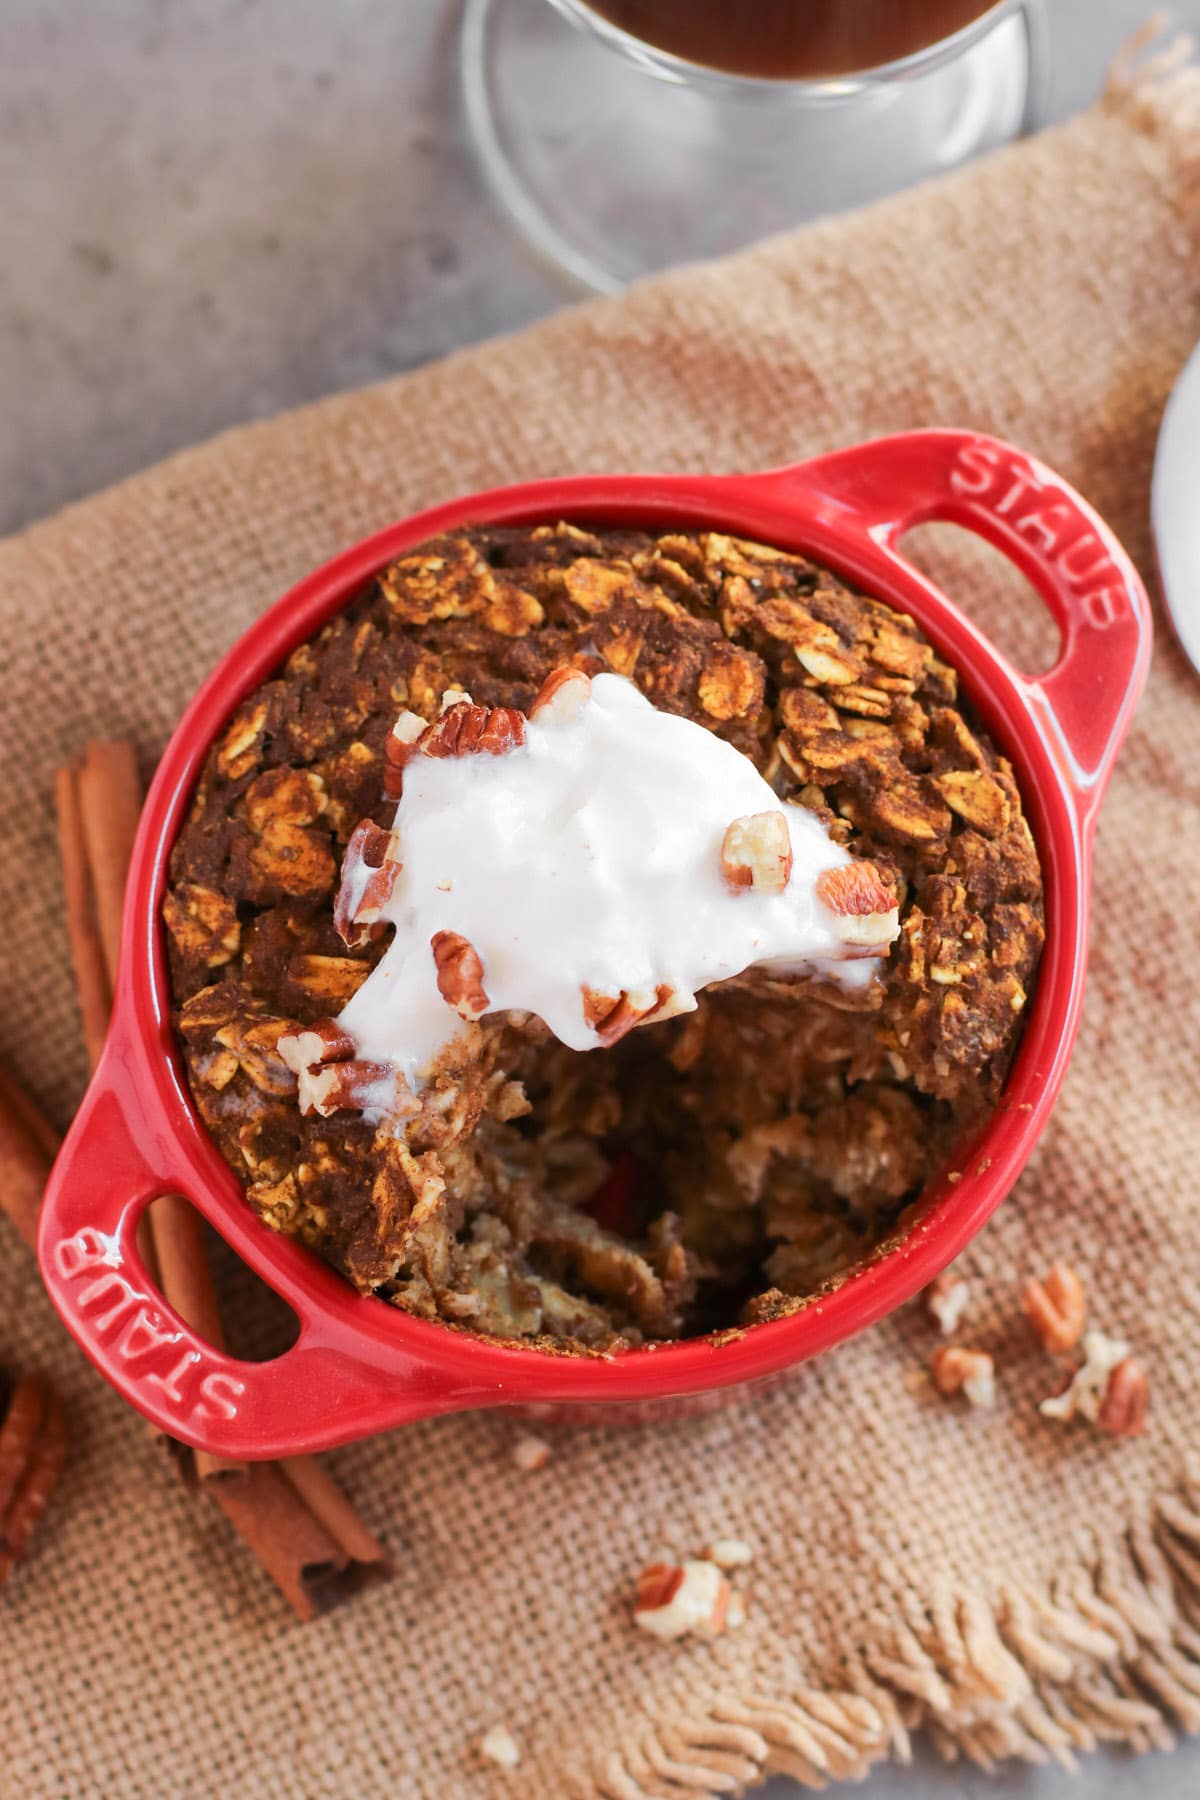 This super easy Healthy Single-Serving Pumpkin Pie Baked Oatmeal recipe is 100% whole grain, gluten free, and vegan, with no added sugar. It's dense, hearty, and filling, just like all baked oatmeal should be, and it's also packed full of pumpkin pie flavor, thanks to the canned pumpkin puree and pumpkin pie spice! #glutenfree #vegan #glutenfreevegan #pumpkinpie #bakedoatmeal #sugarfree #healthybreakfast #pumpkinpuree #pumpkinspice